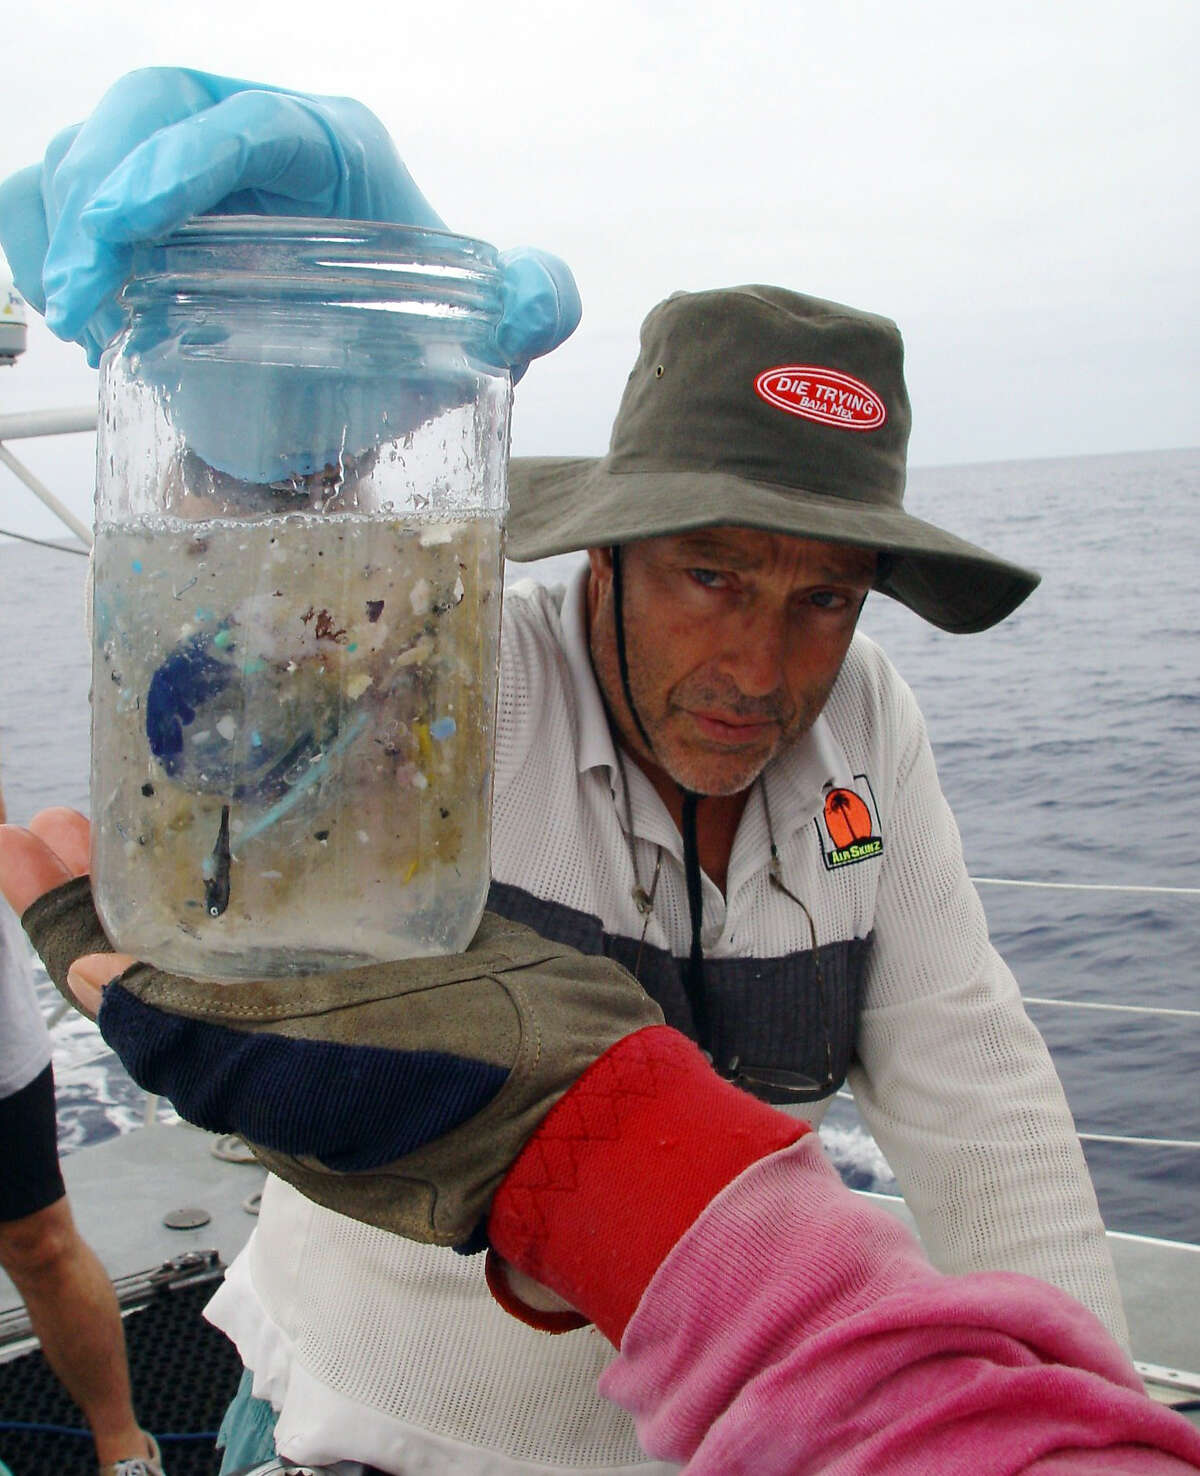 Marine researcher Charles Moore holds a sample of ocean water from the North Central Pacific Gyre that contains small pieces of plastic.